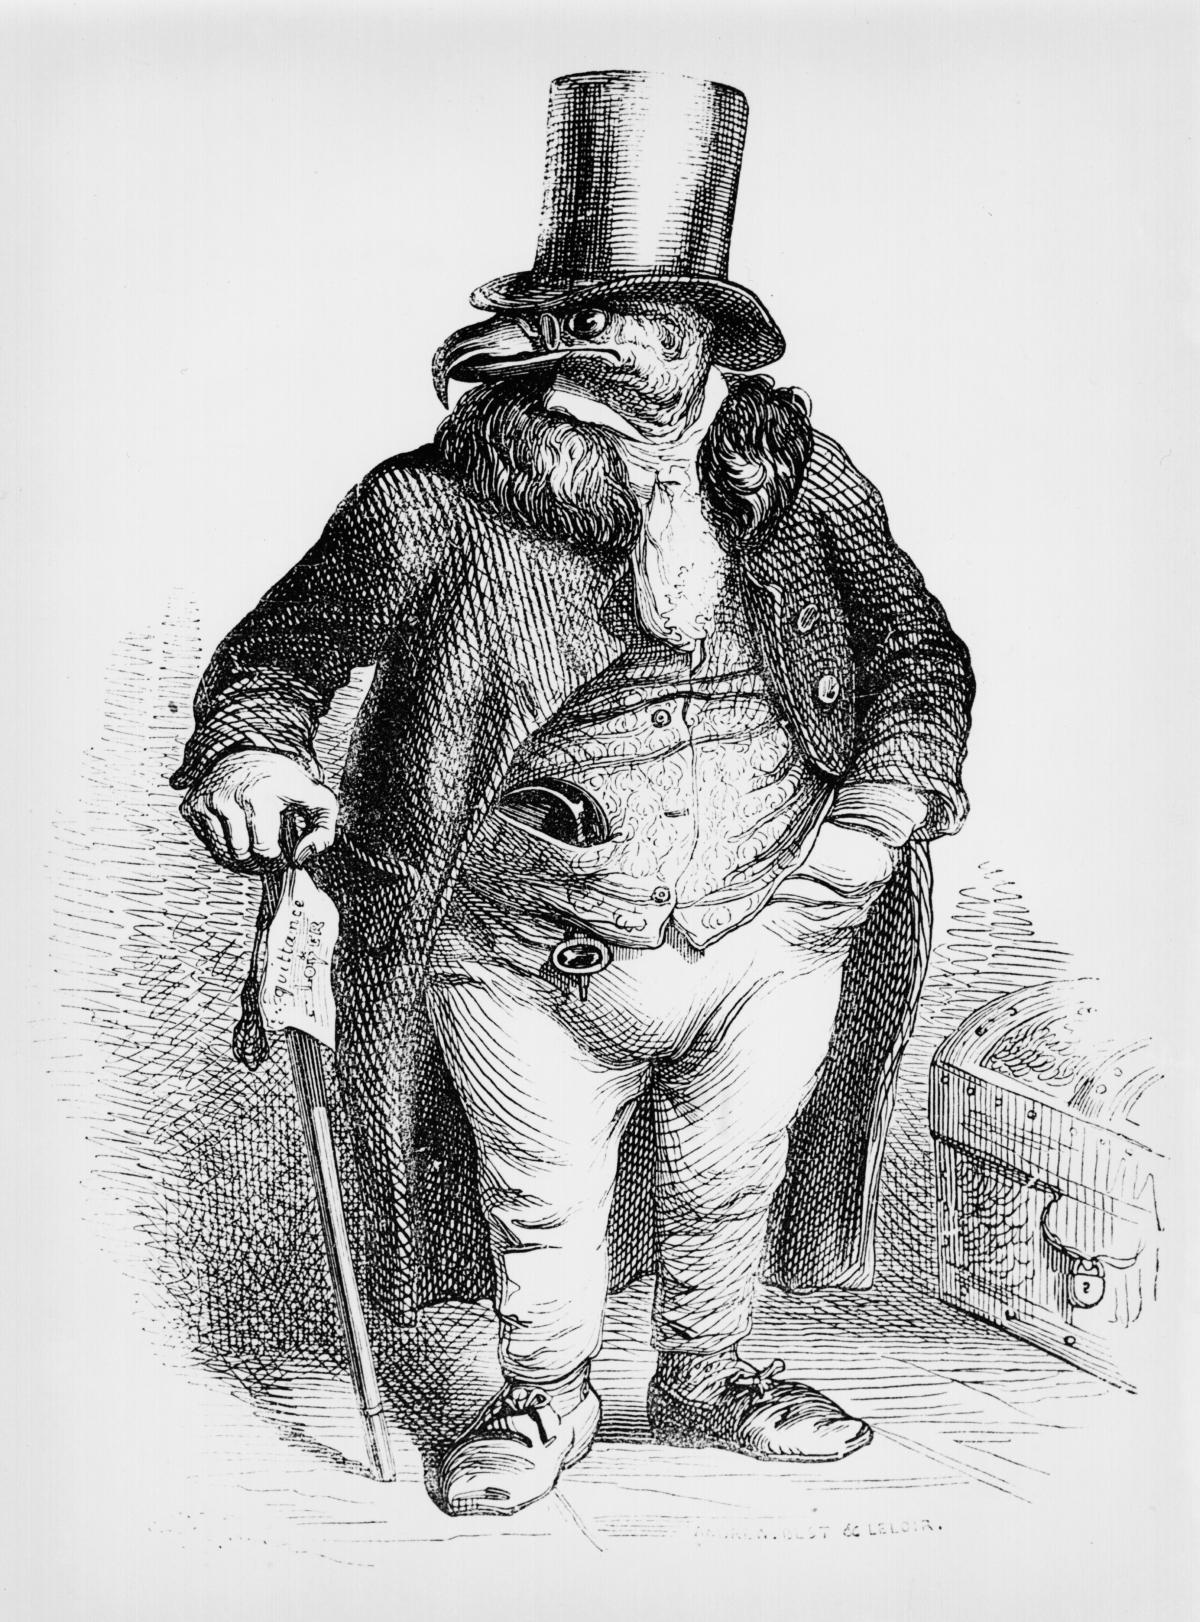 A vulture dressed as a portly gentleman, wearing a top hat, coat and tails